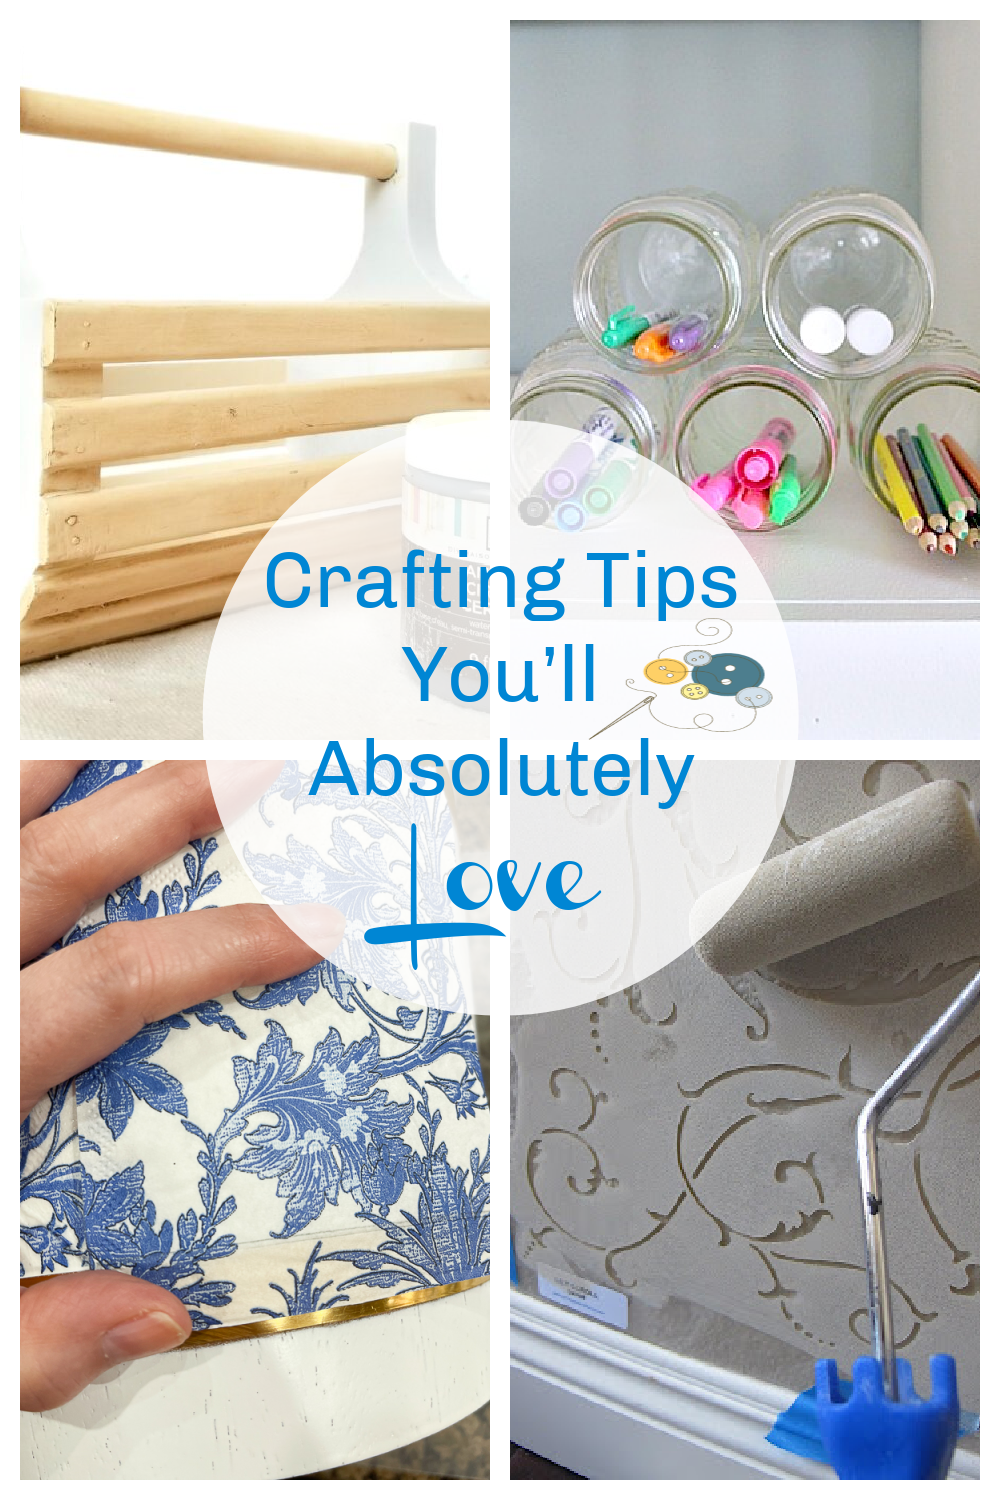 Crafting Tips You’ll Absolutely Love